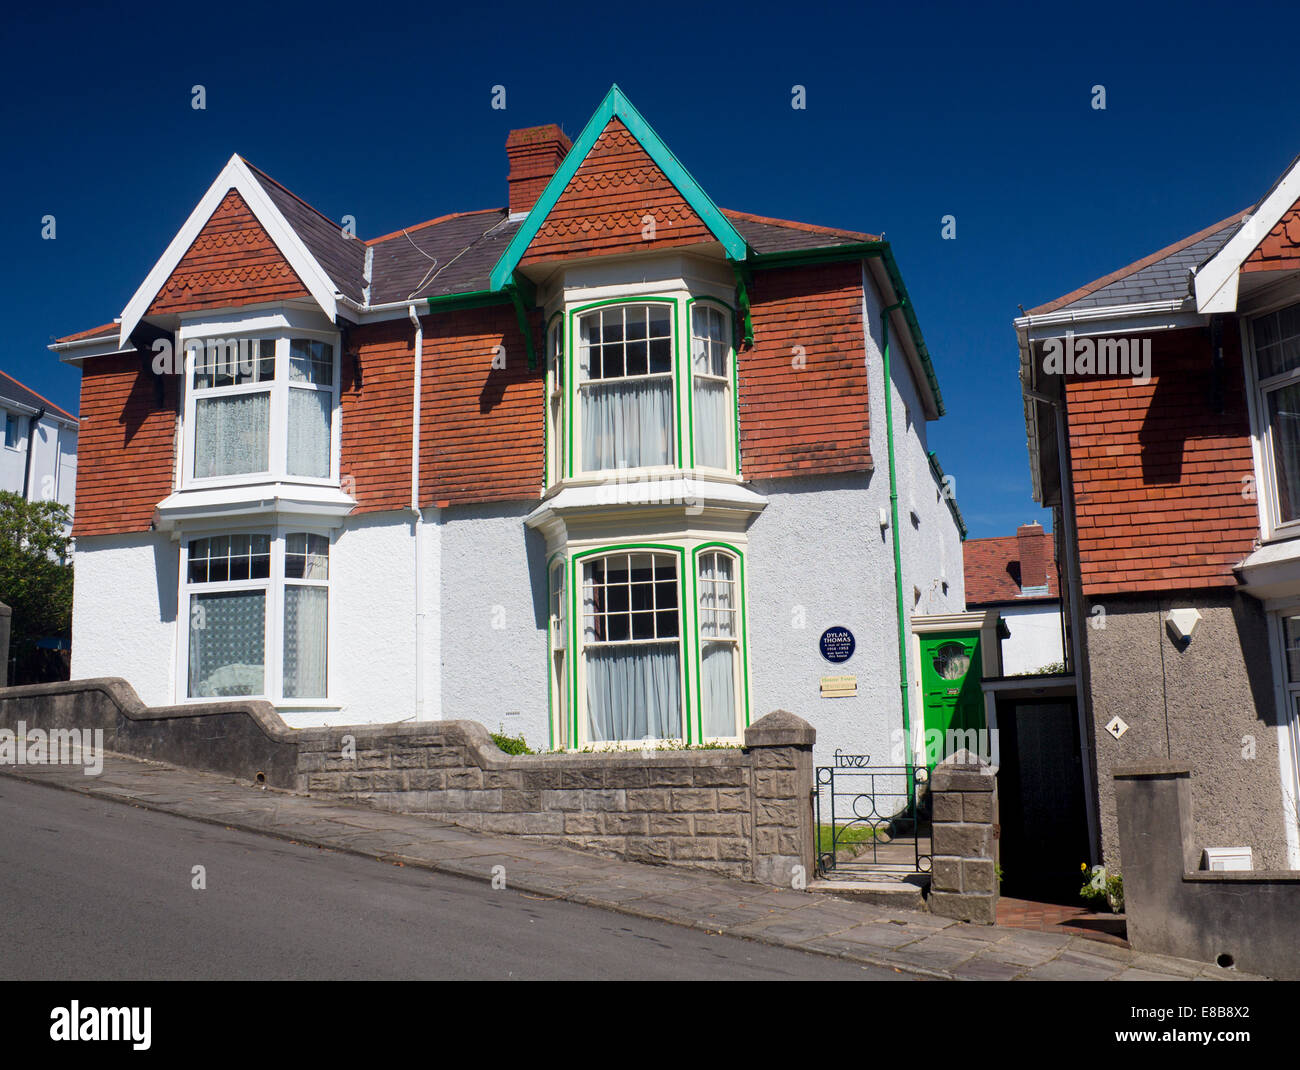 Exterior of 5 Cwmdonkin Drive Uplands Swansea Wales UK Birthplace and childhood home of poet Dylan Marlais Thomas 1914-1953 Stock Photo